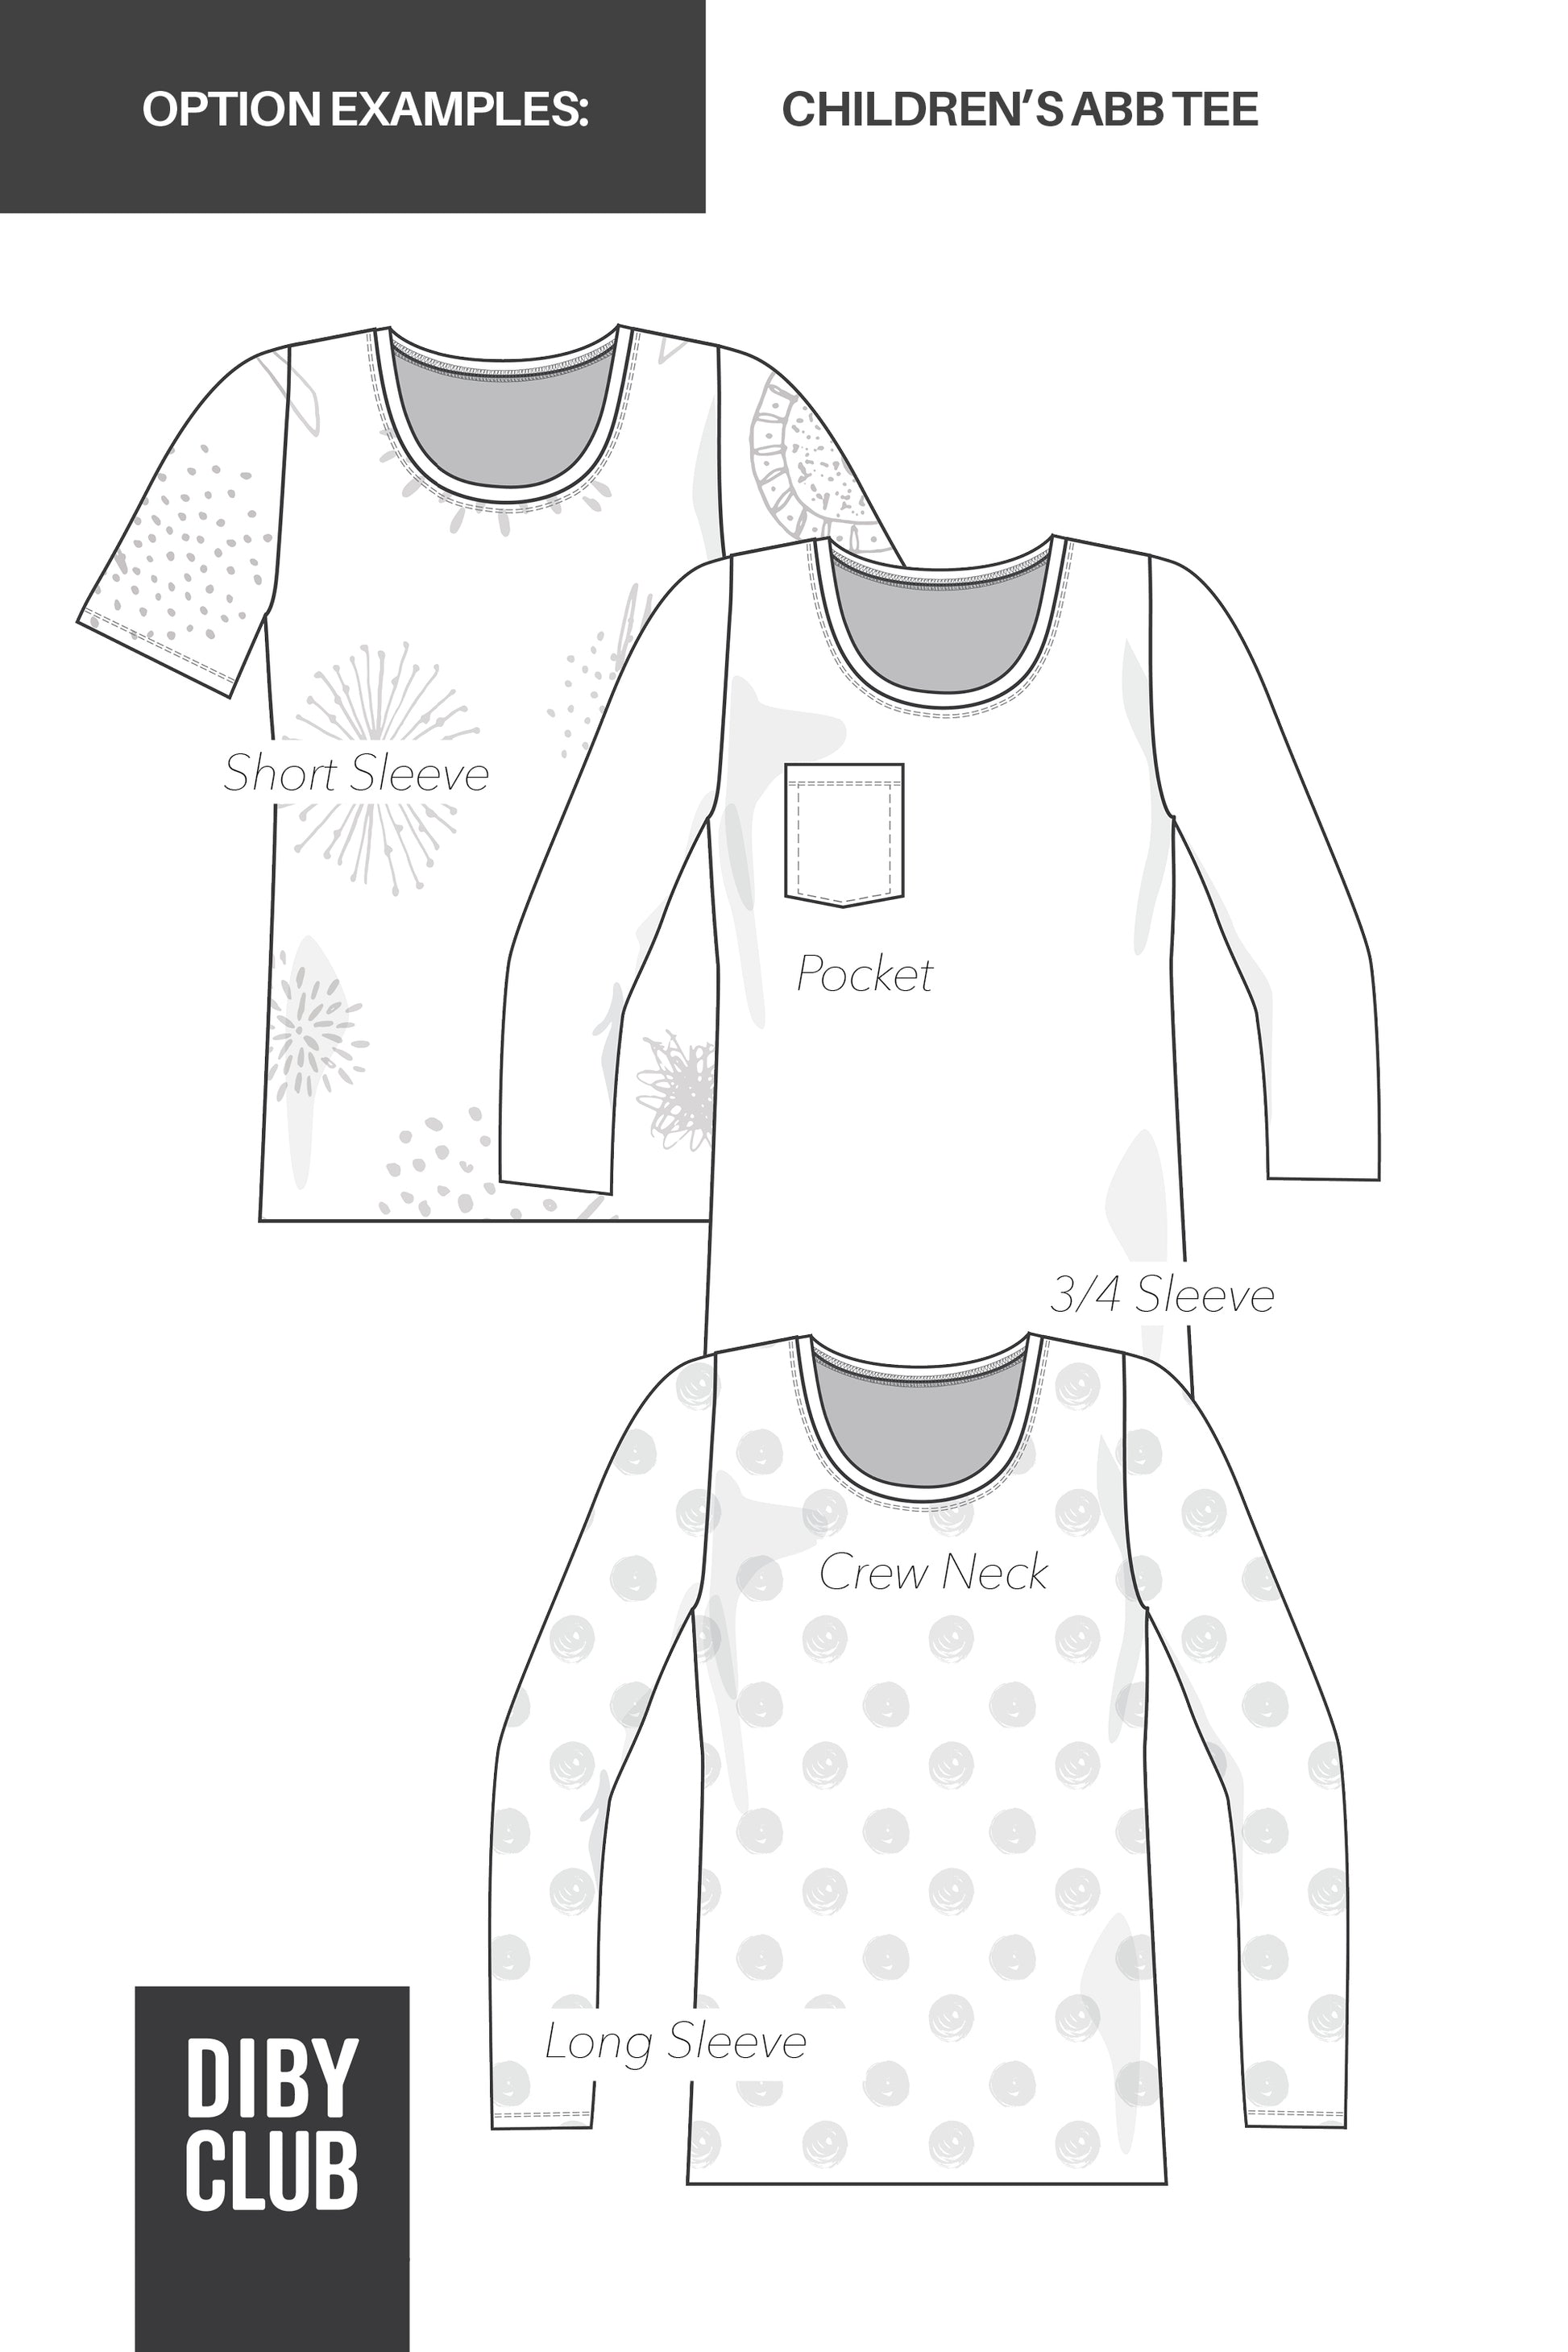 Sketch of different pattern options: short sleeve, 3/4 sleeve, long sleeve, crew neck, and pocket